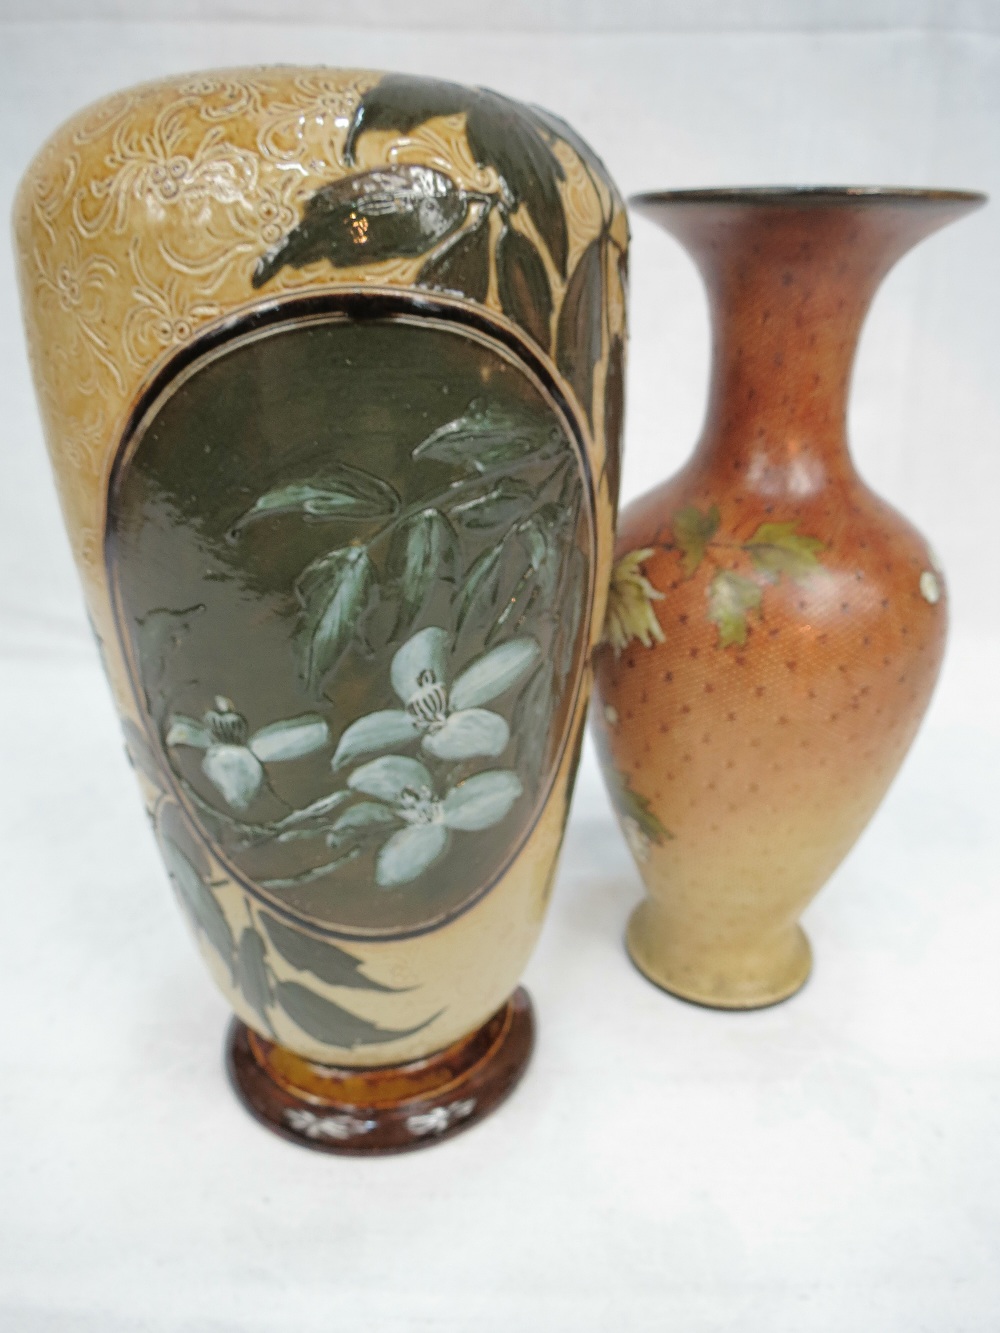 An early Doulton Stoneware vase decorated with a bird and another decorated with flowers.